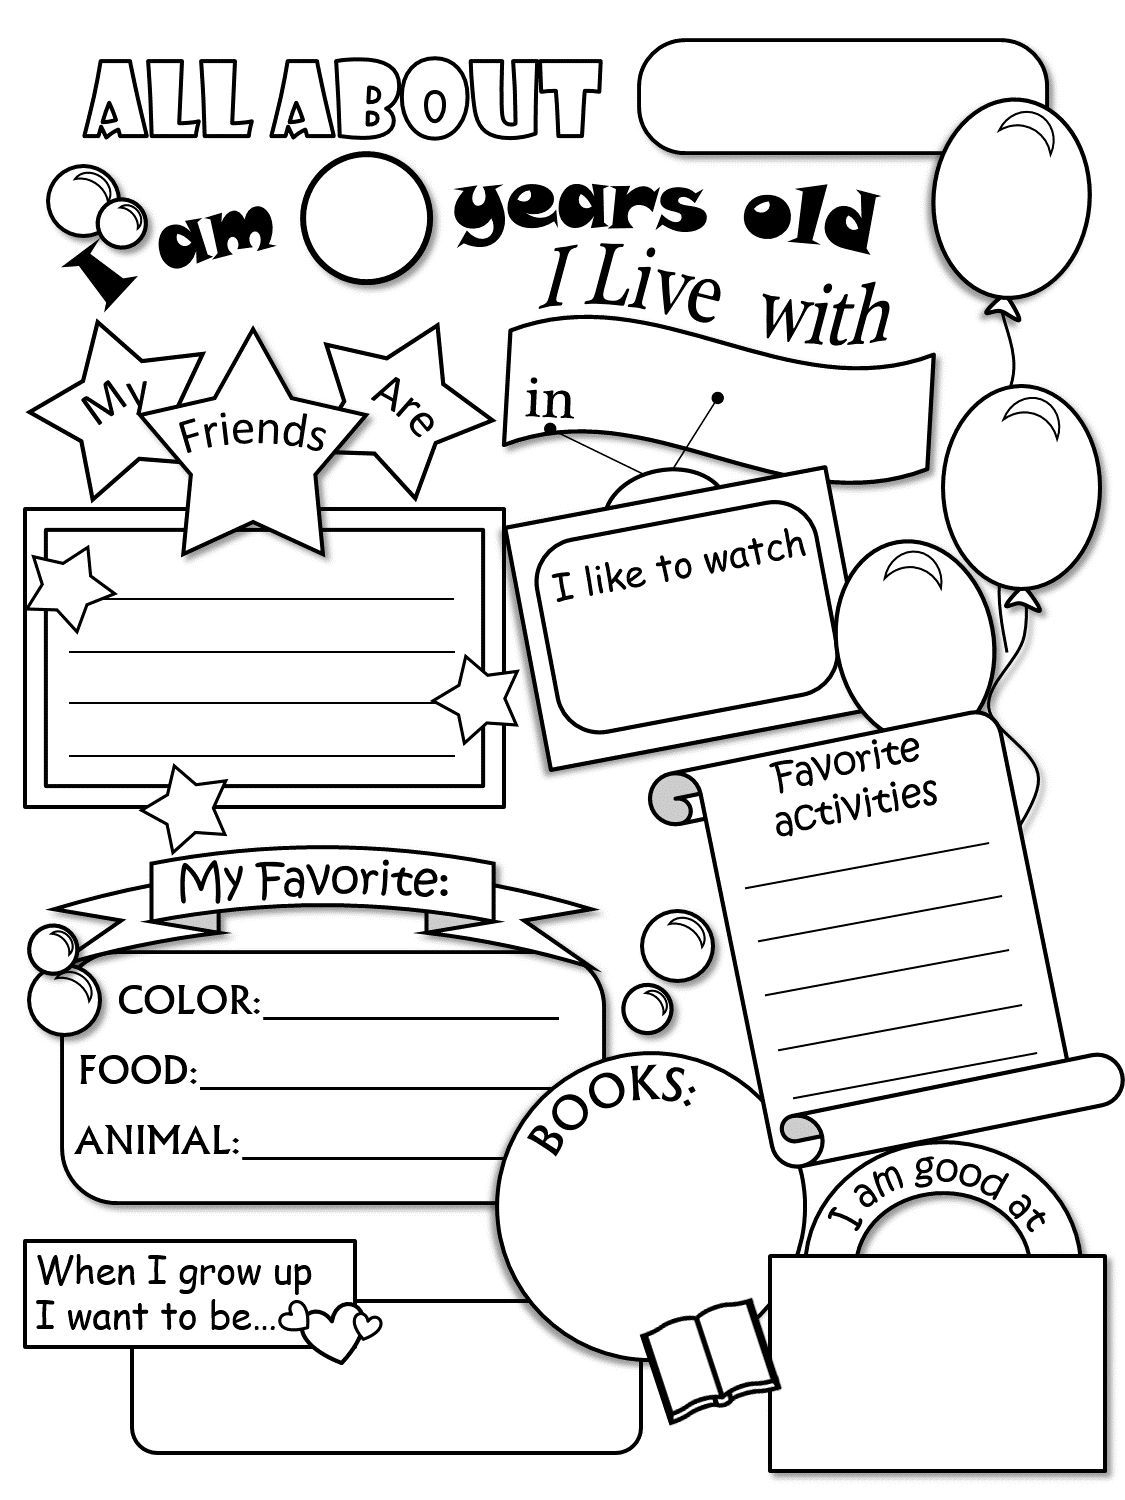 free-printable-all-about-me-worksheet-alphabetworksheetsfree